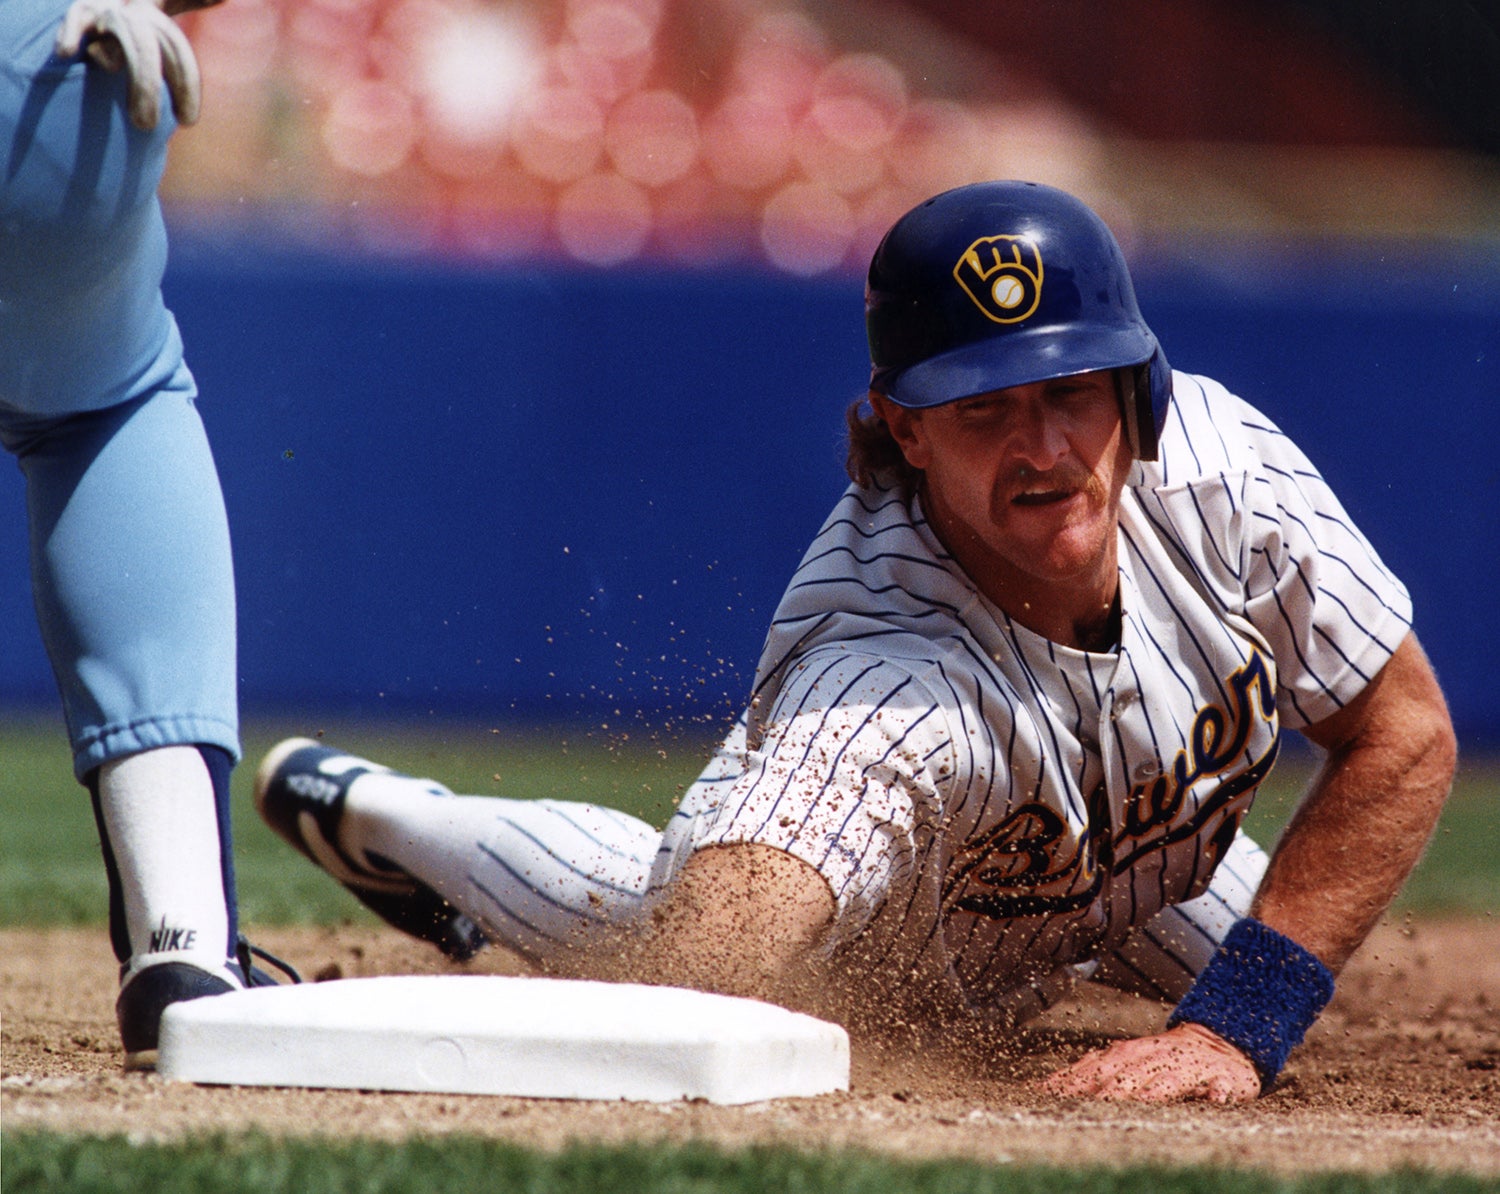 Robin Yount named AL Most Valuable Player